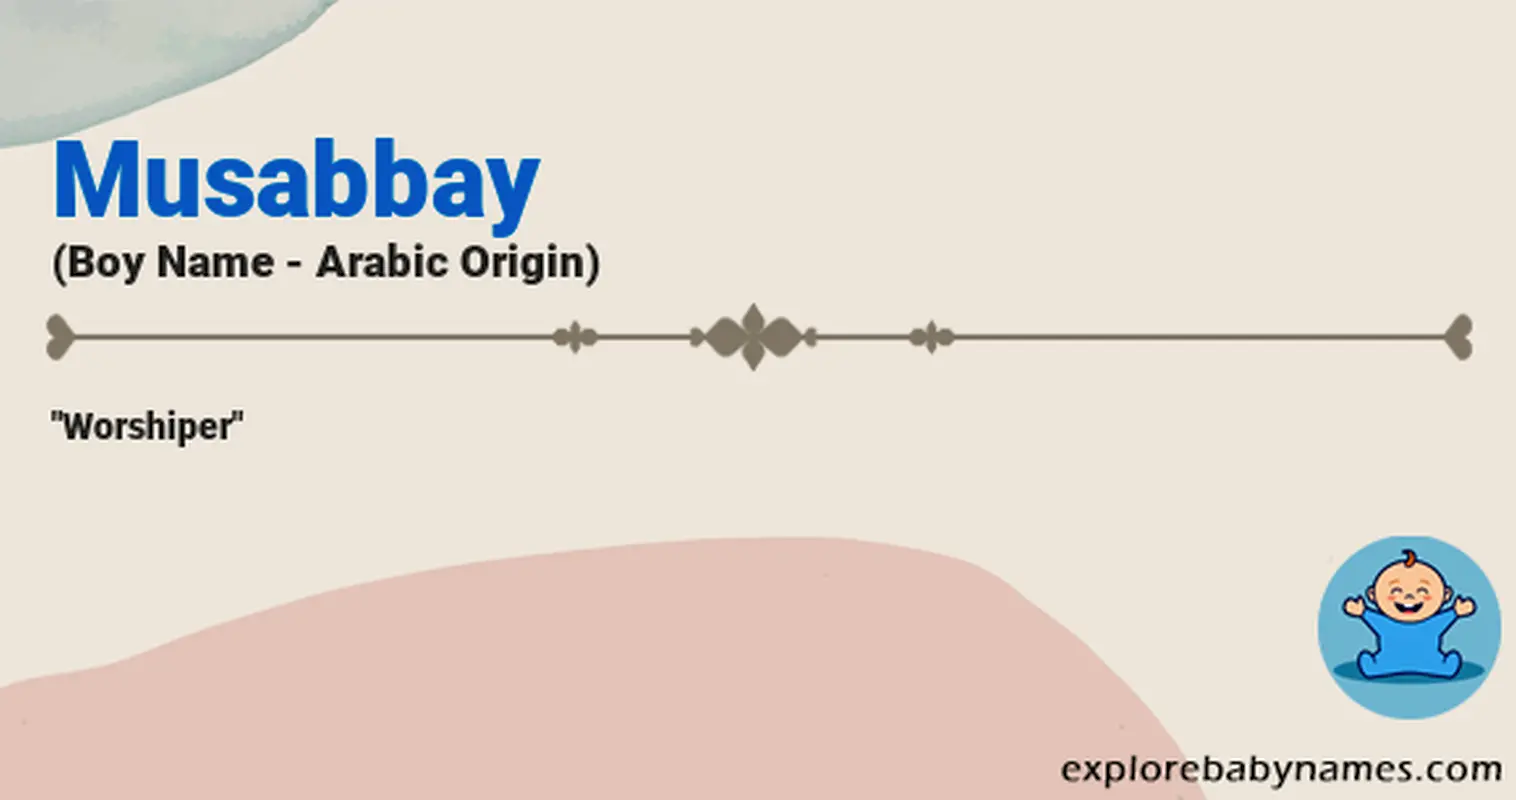 Meaning of Musabbay